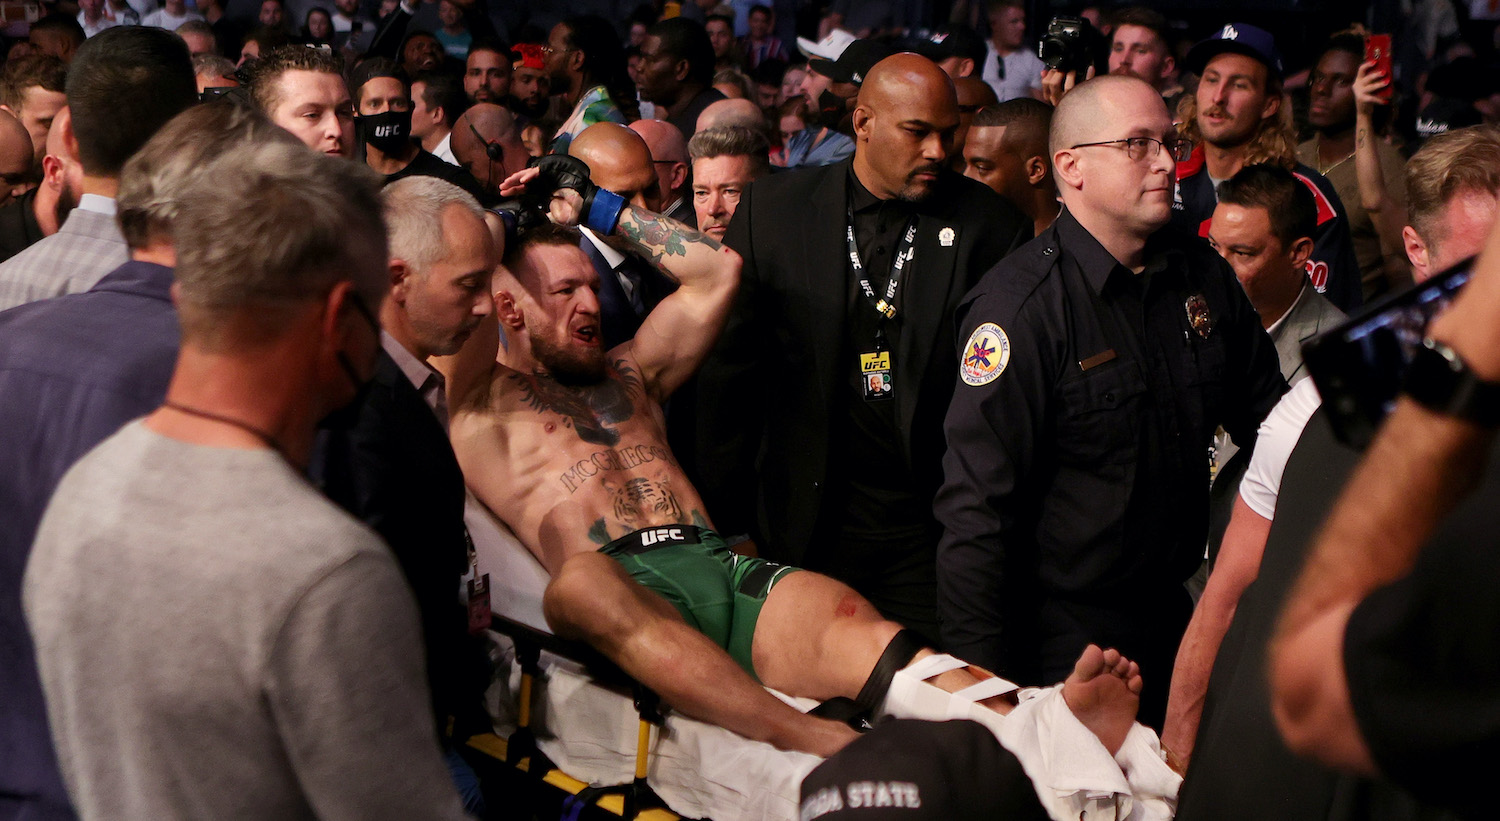 LAS VEGAS, NEVADA - JULY 10: Conor McGregor of Ireland is carried out of the arena on a stretcher after injuring his ankle in the first round of his lightweight bout against Dustin Poirier during UFC 264: Poirier v McGregor 3 at T-Mobile Arena on July 10, 2021 in Las Vegas, Nevada. (Photo by Stacy Revere/Getty Images)